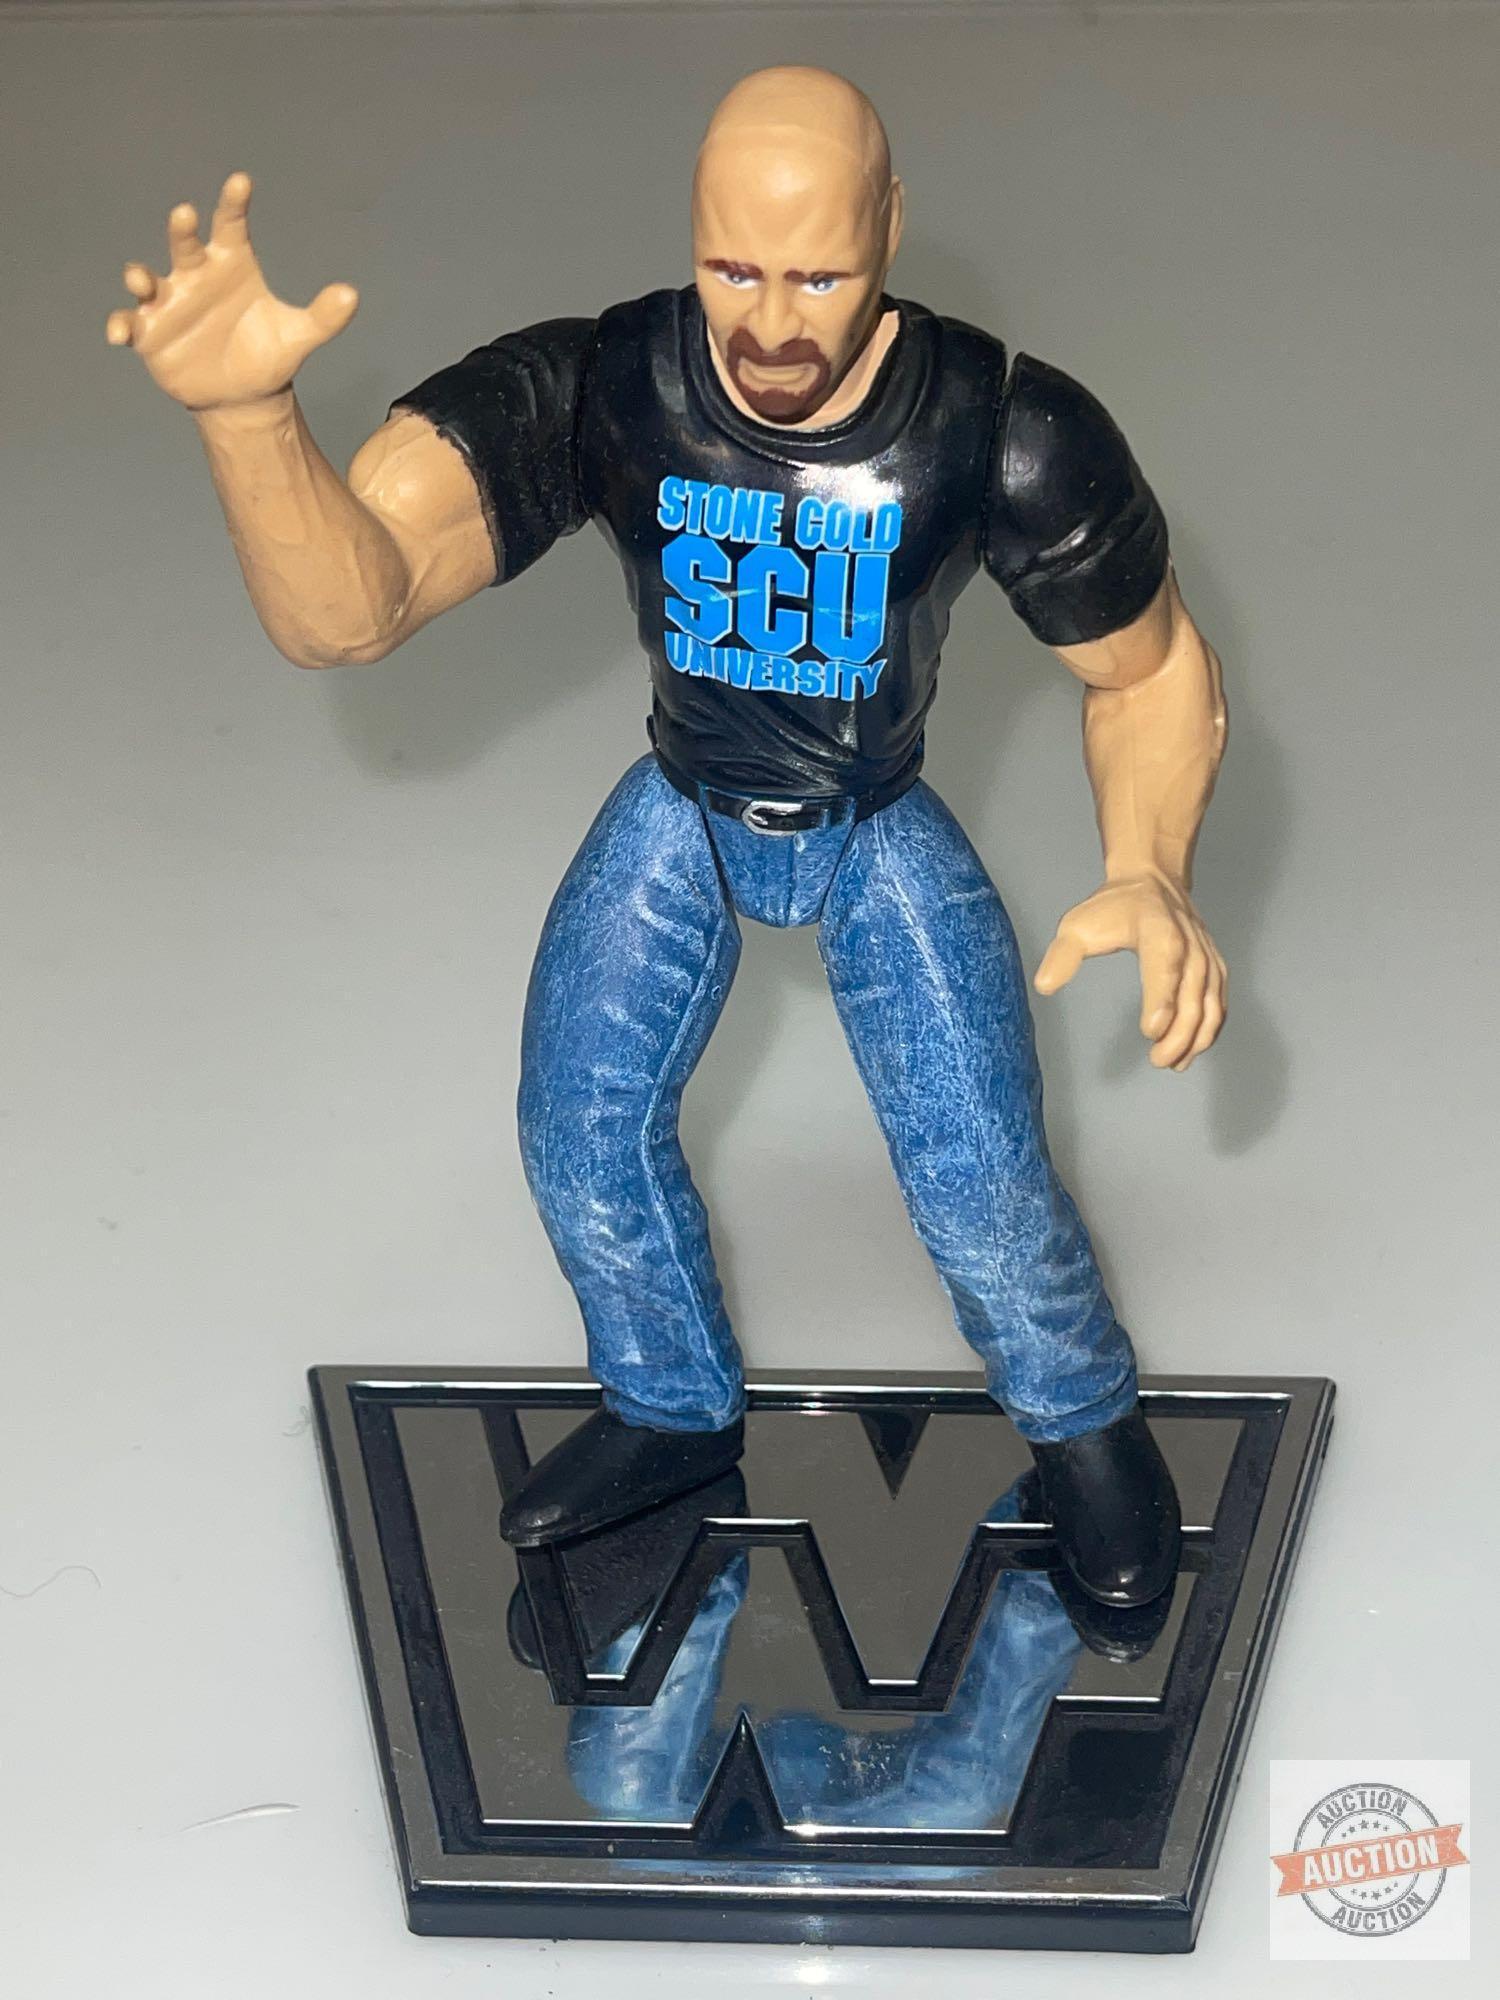 Toys - 4 WWF Wrestling auction figures, 1997, 2 with stands, 4x's the money